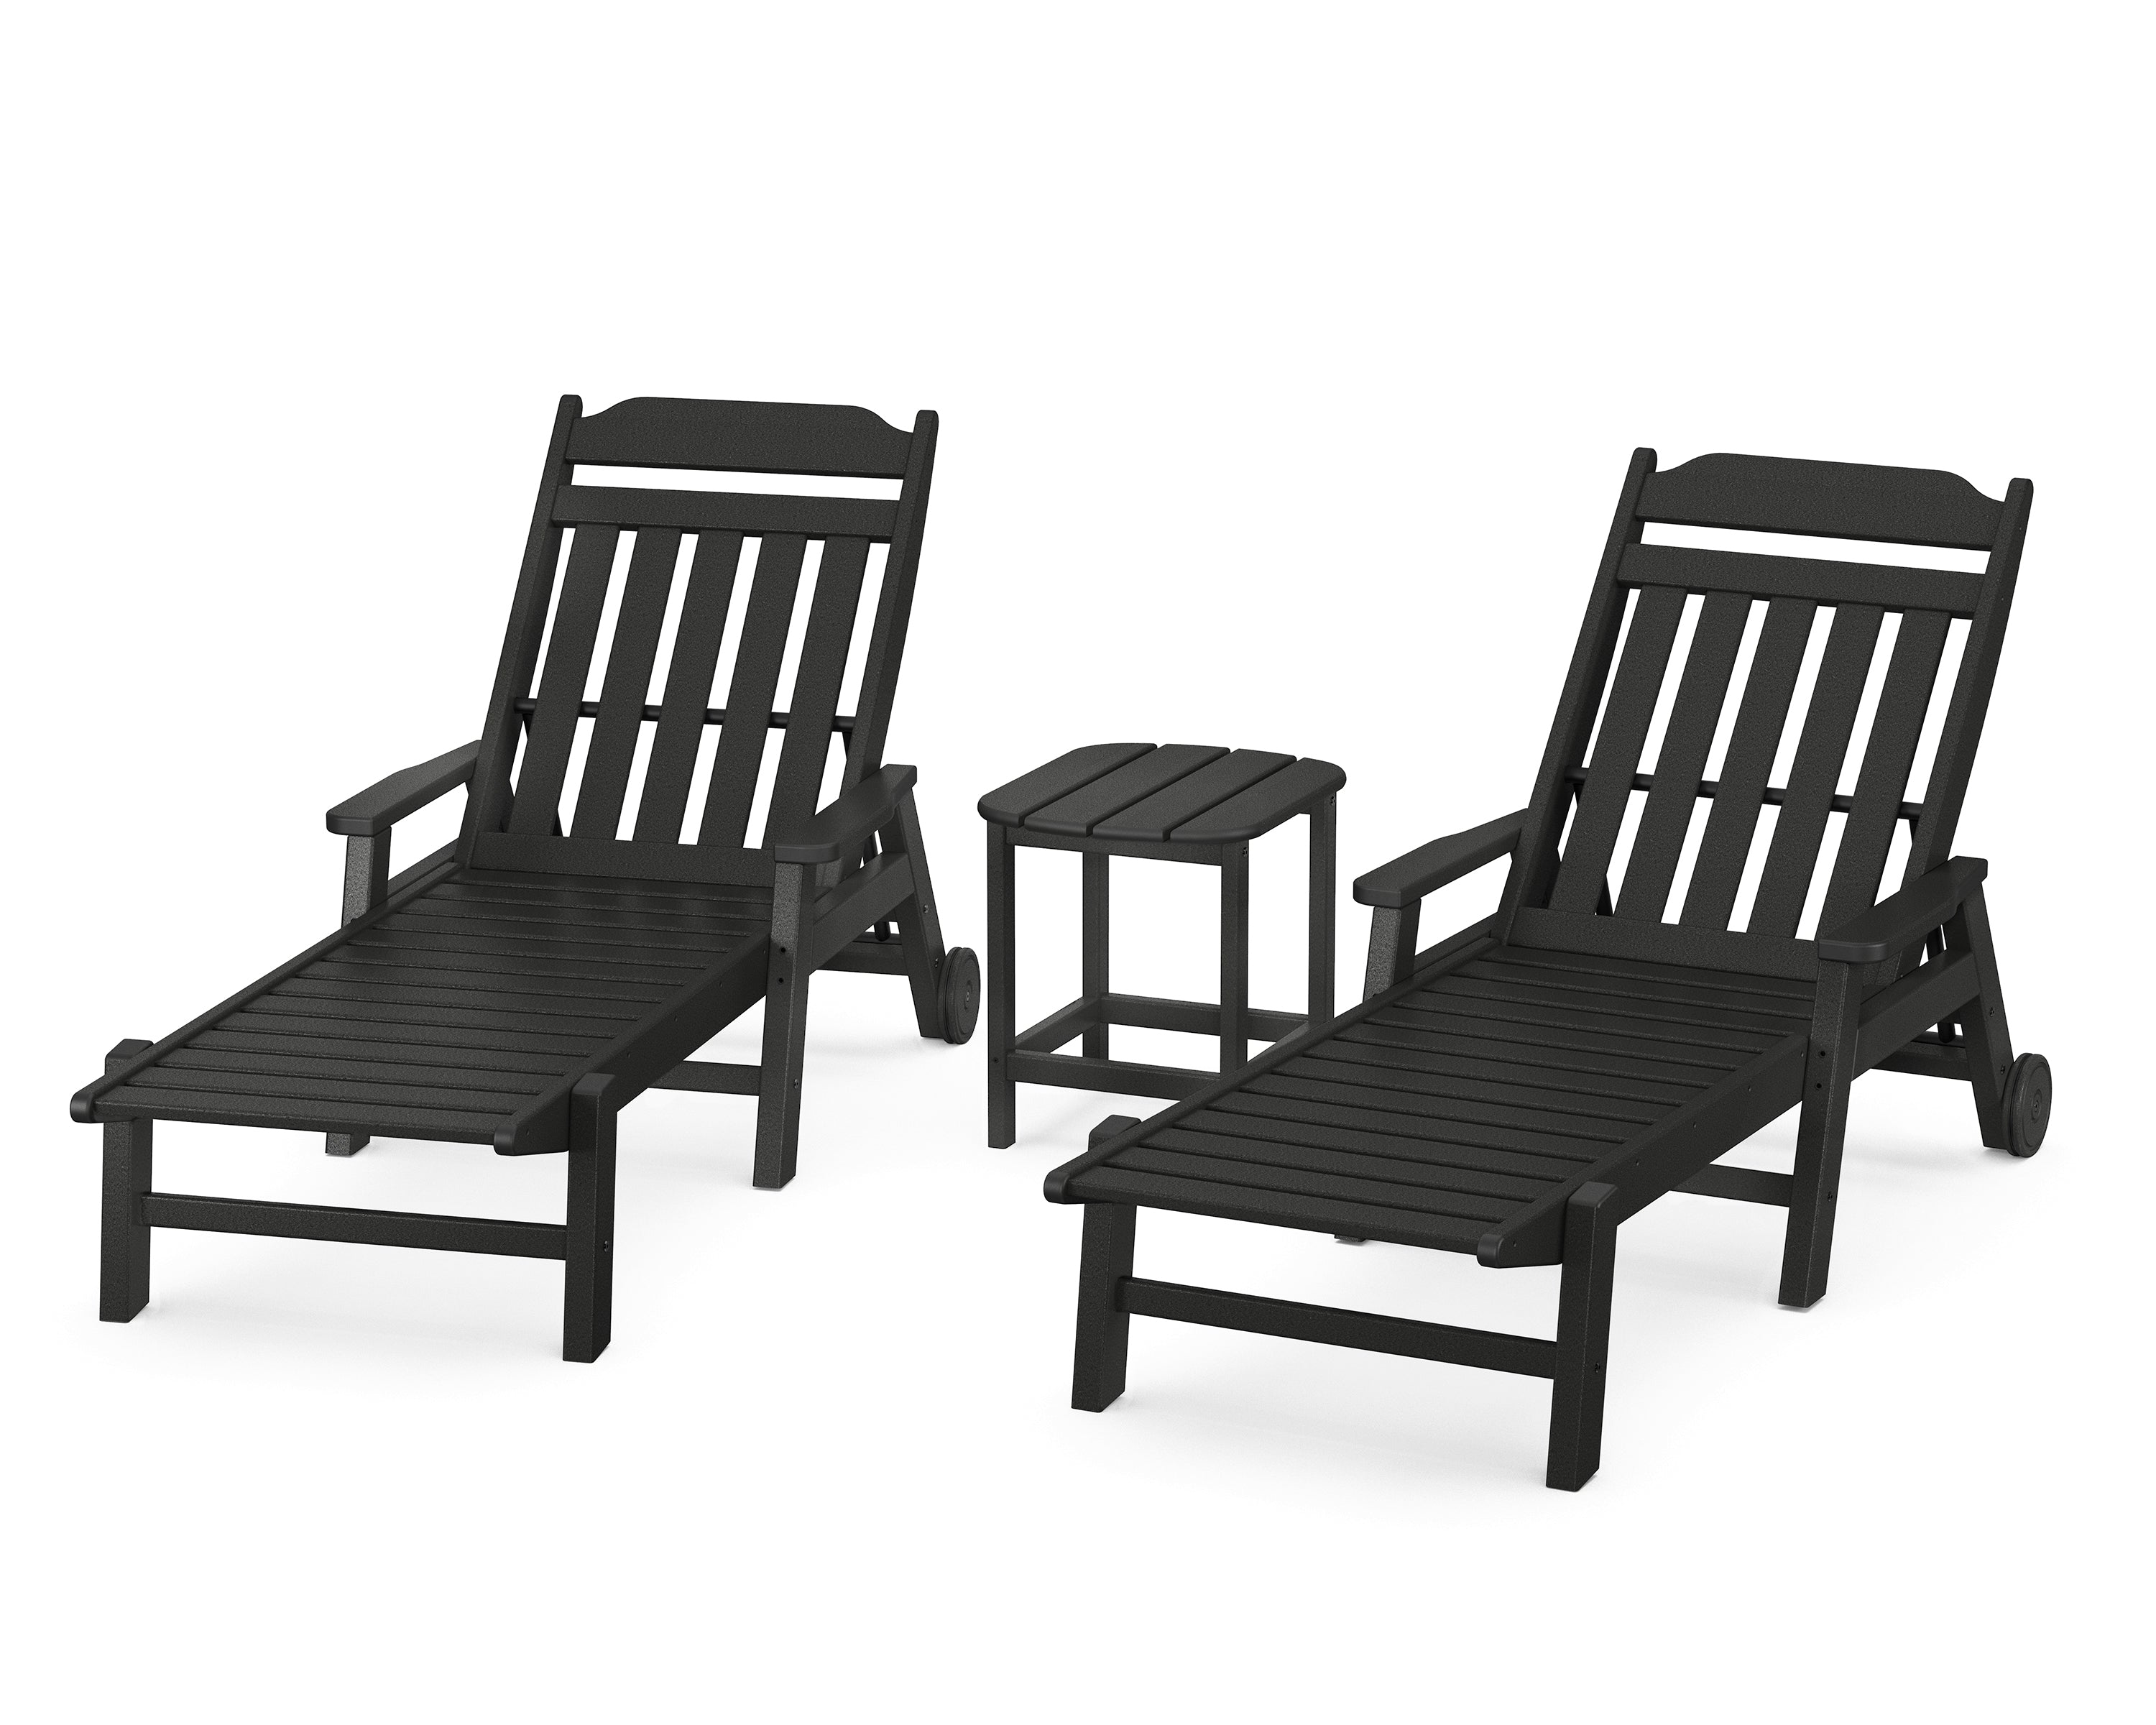 POLYWOOD Country Living 3-Piece Chaise Set with Arms and Wheels in Black